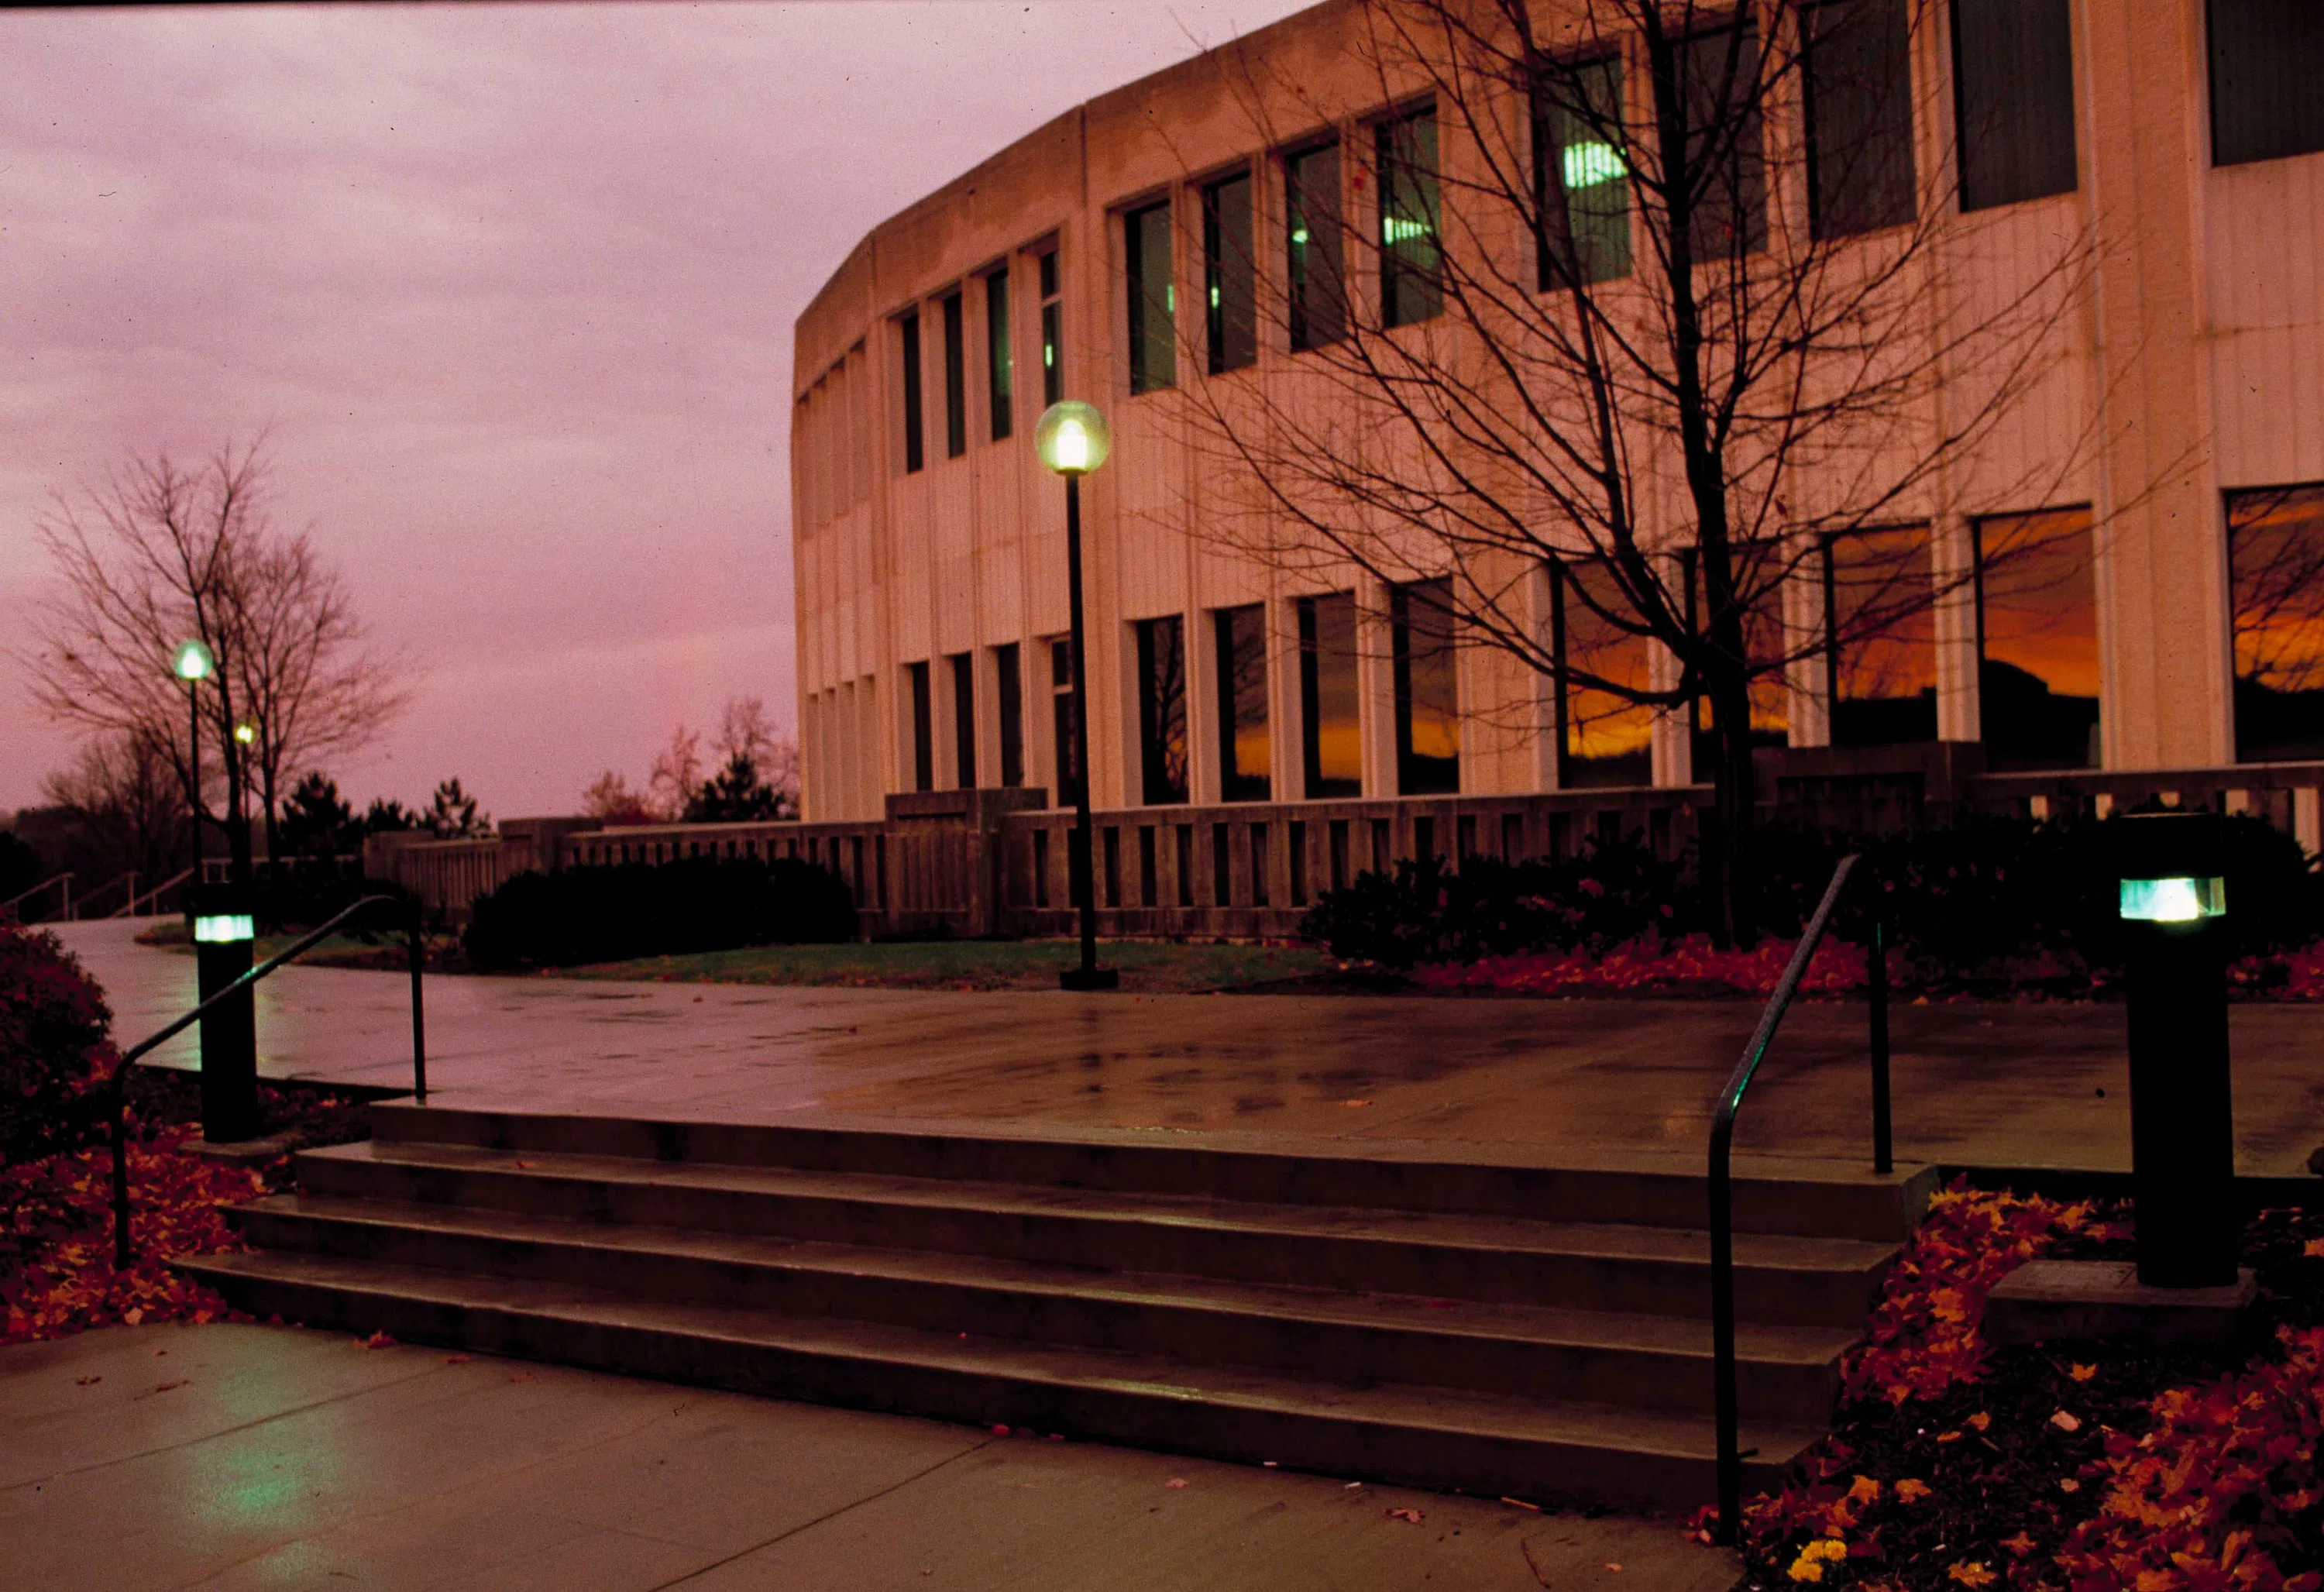 A curved building with small, dark windows is featured in front of a light pink sunset.